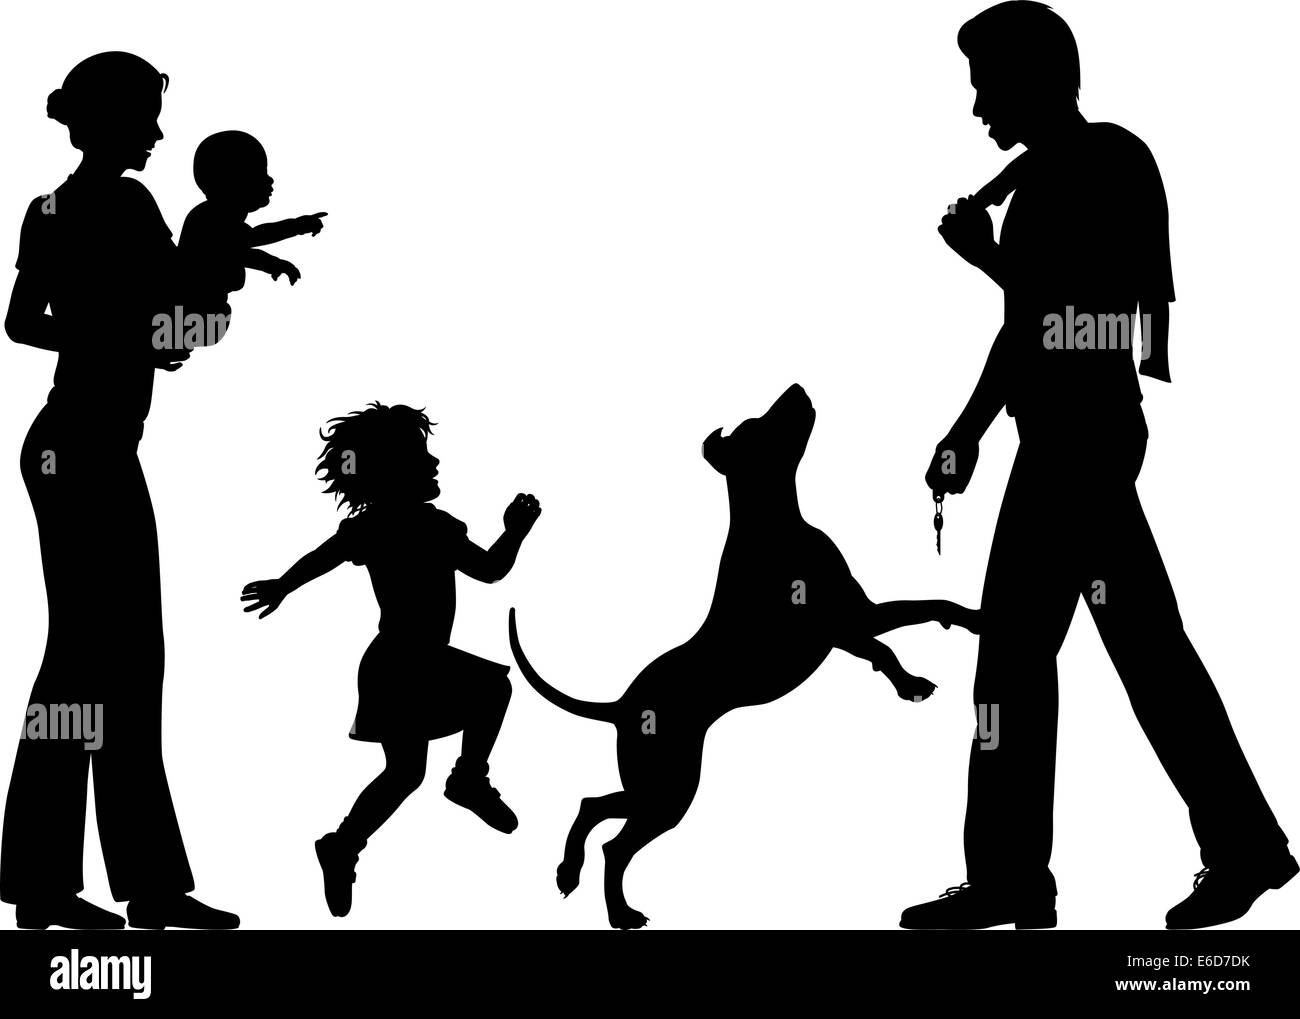 Editable vector silhouettes of a man welcomed home by wife, children and dog with all figures as separate objects Stock Vector